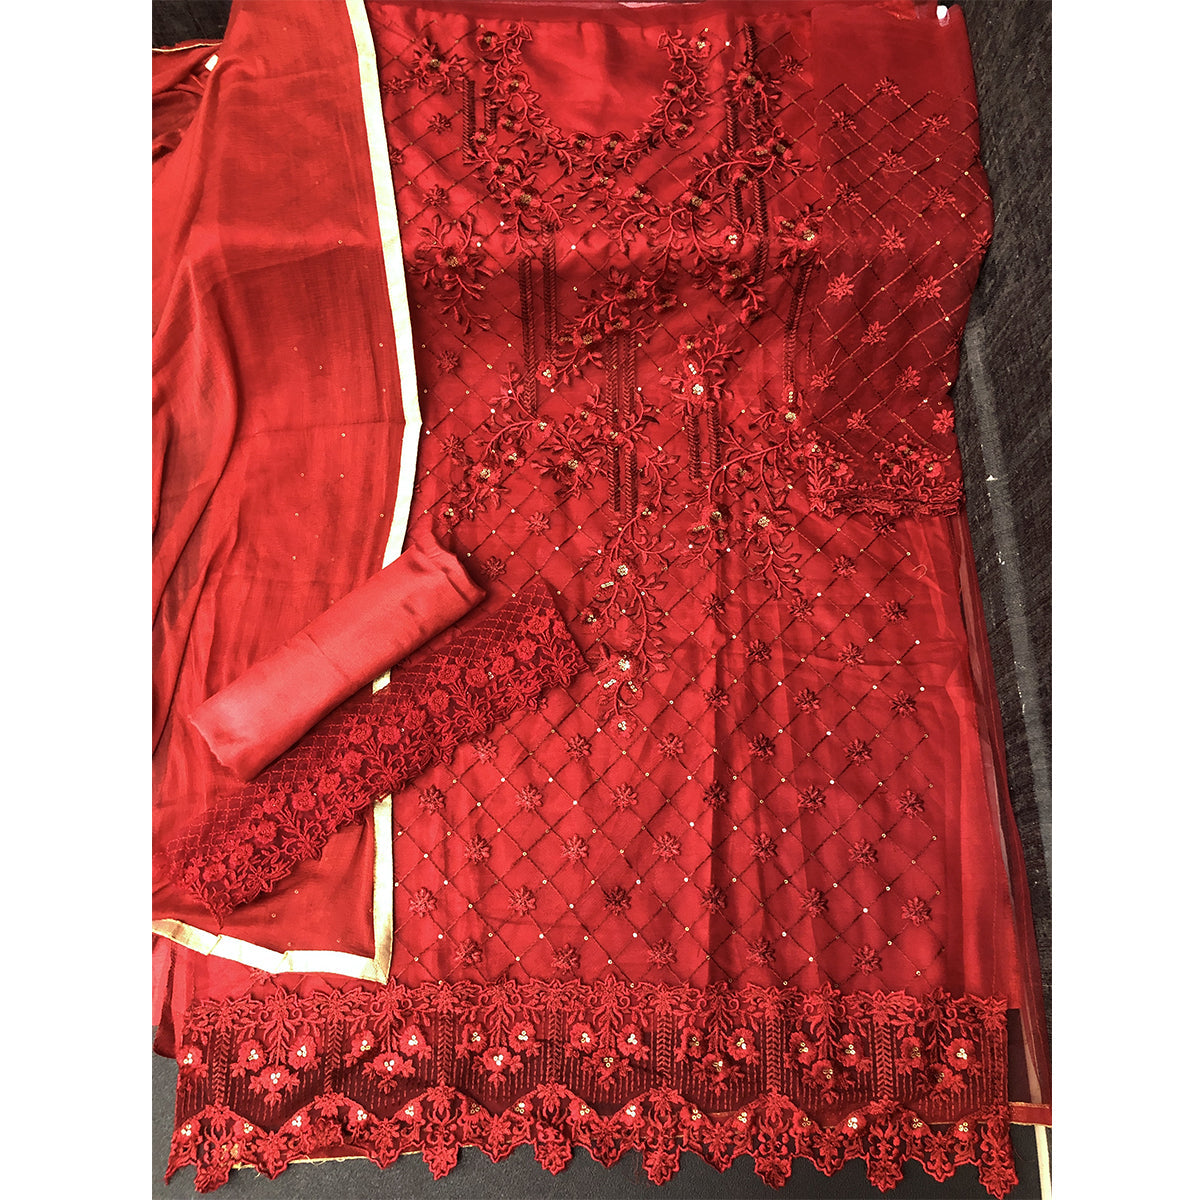 Shafnufab Embroidered Net Pakistani Suit in Red